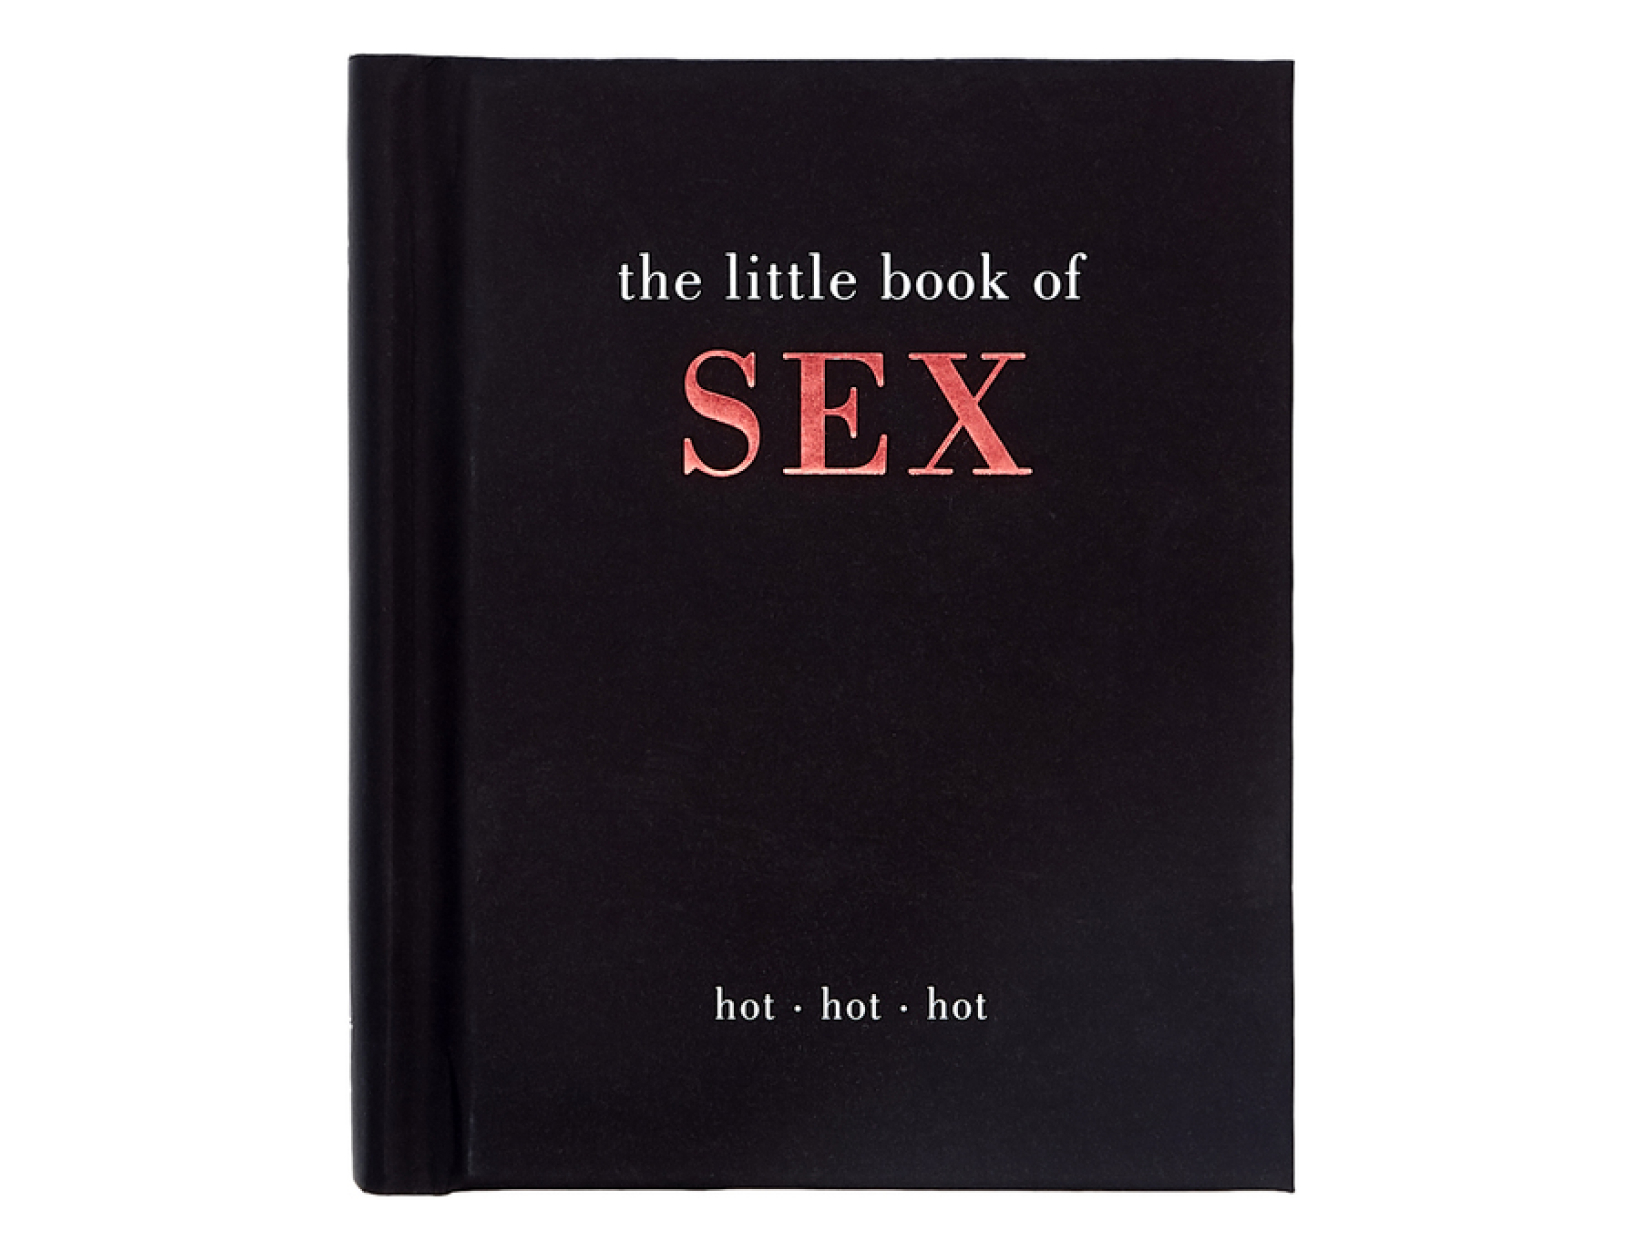 Books on great oral sex